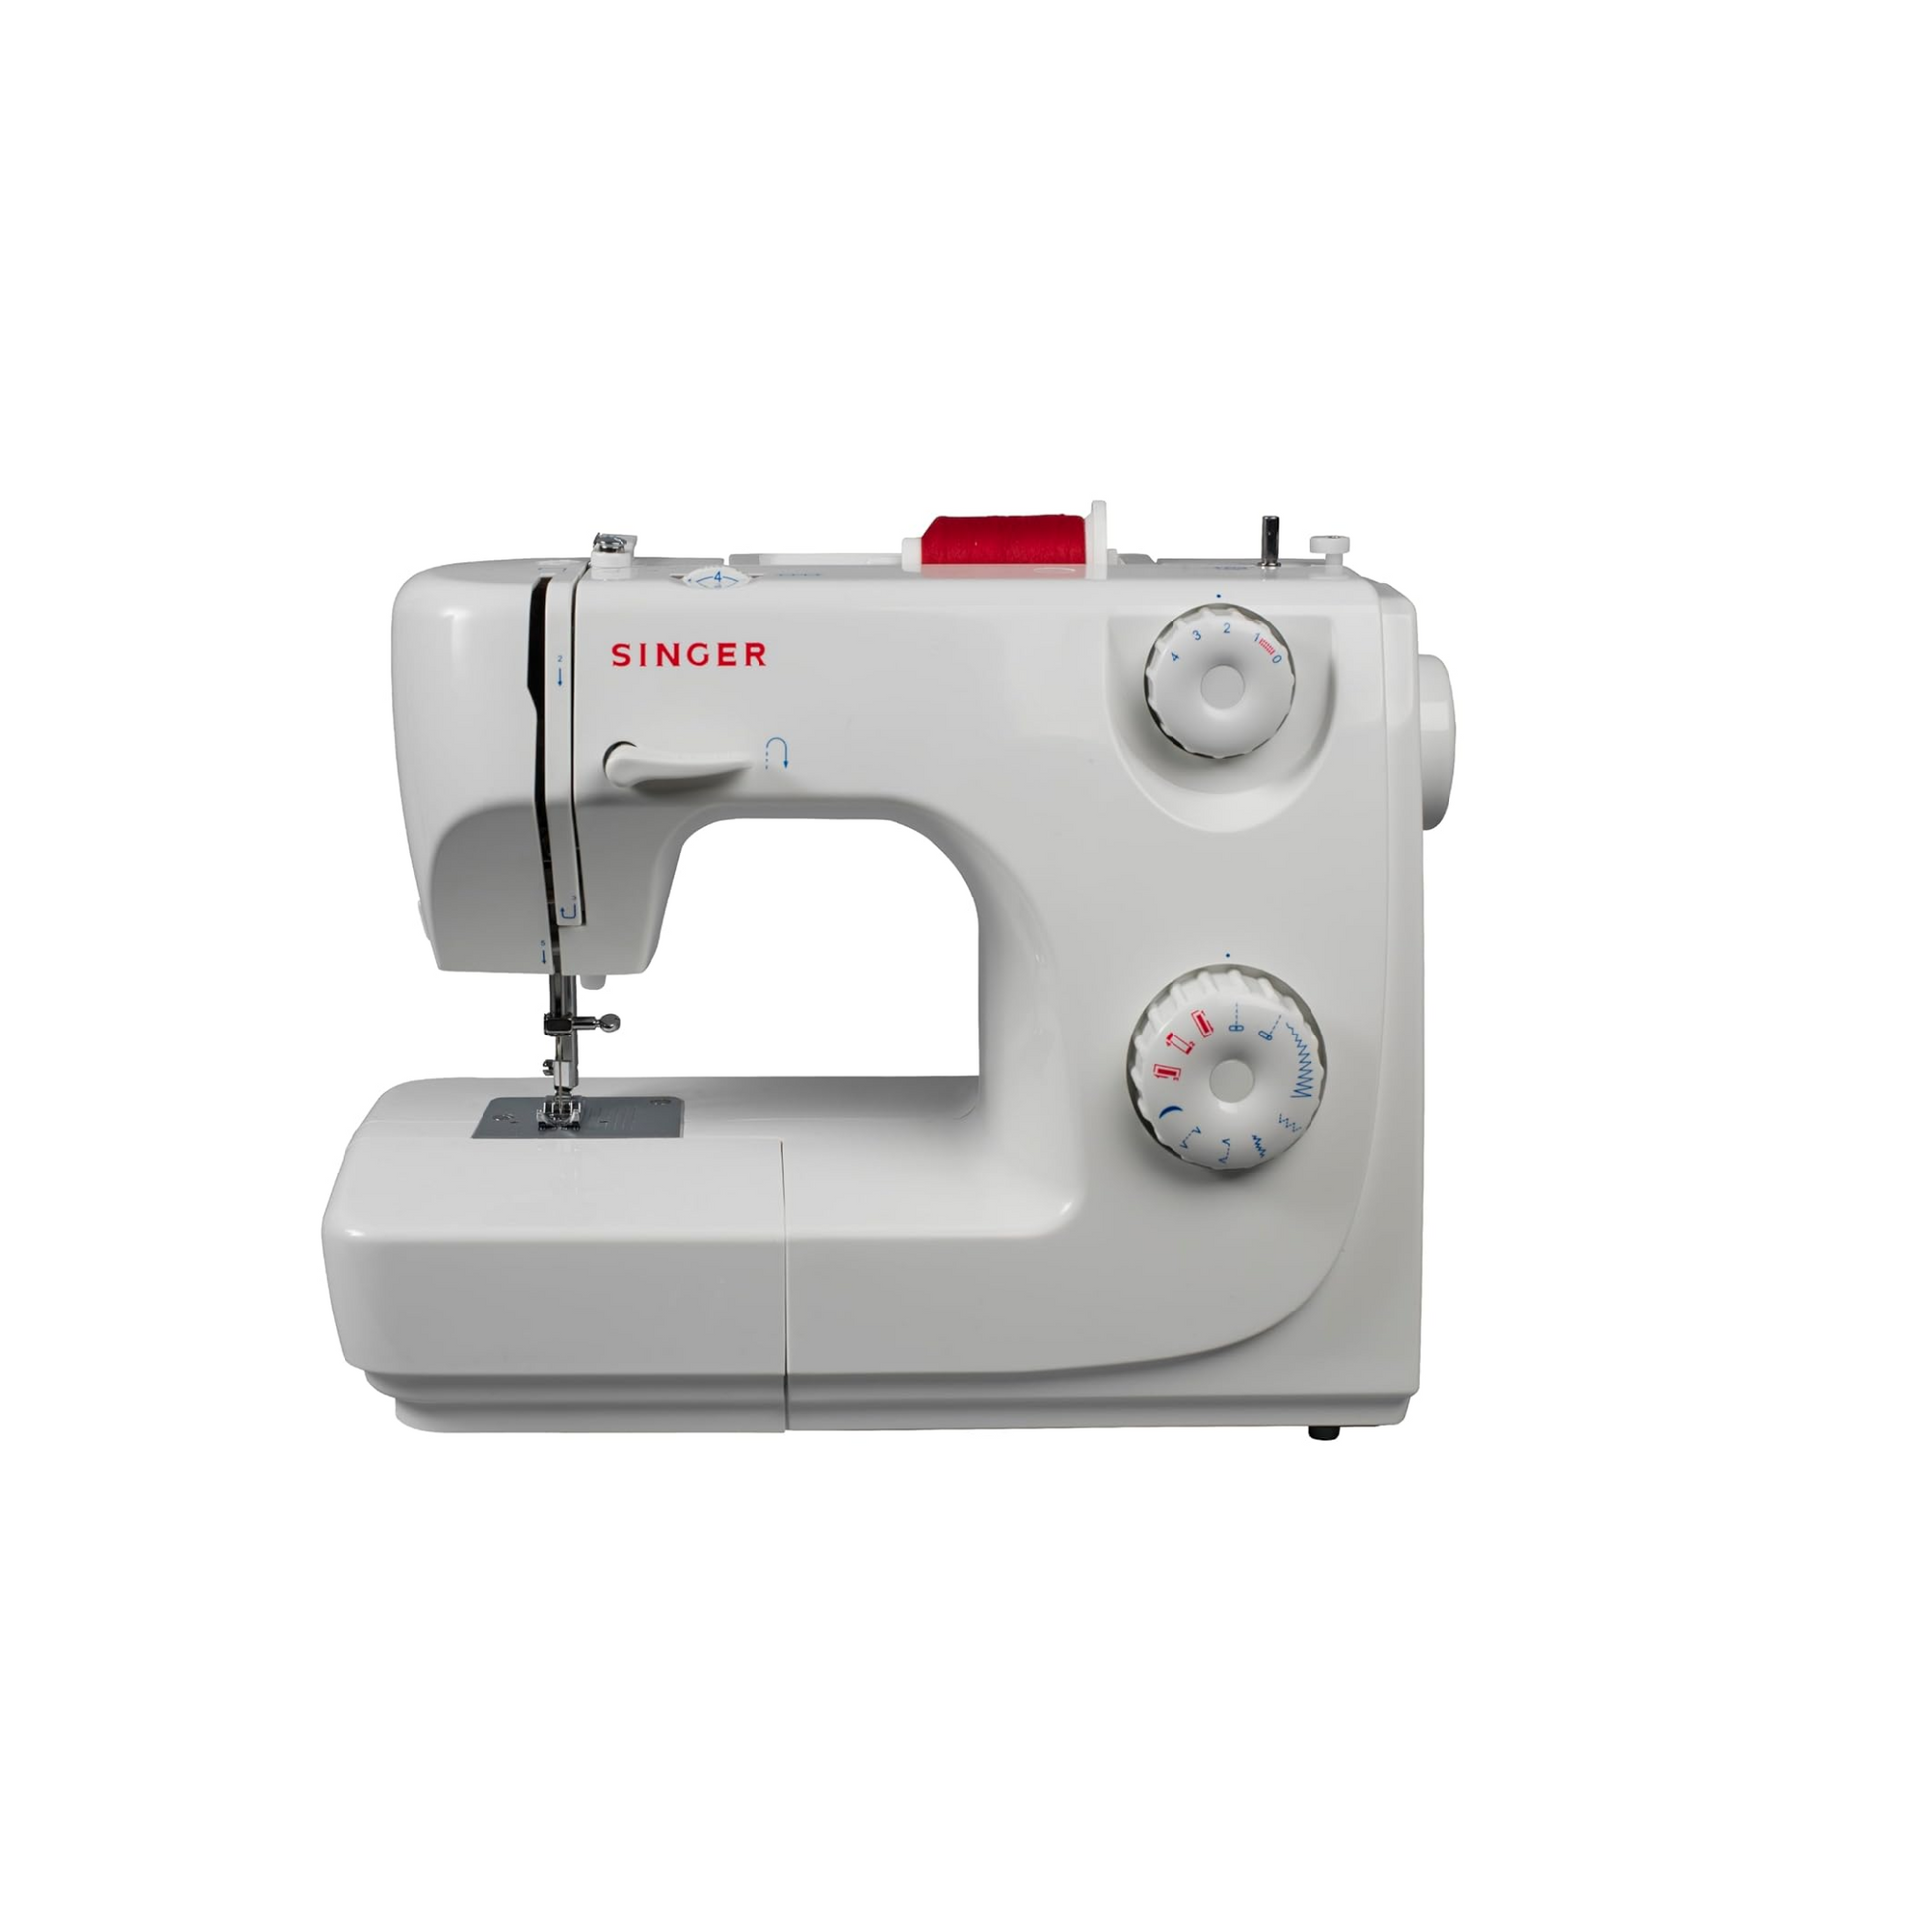 Singer FM 8280 - Sewing machine - White - Front view